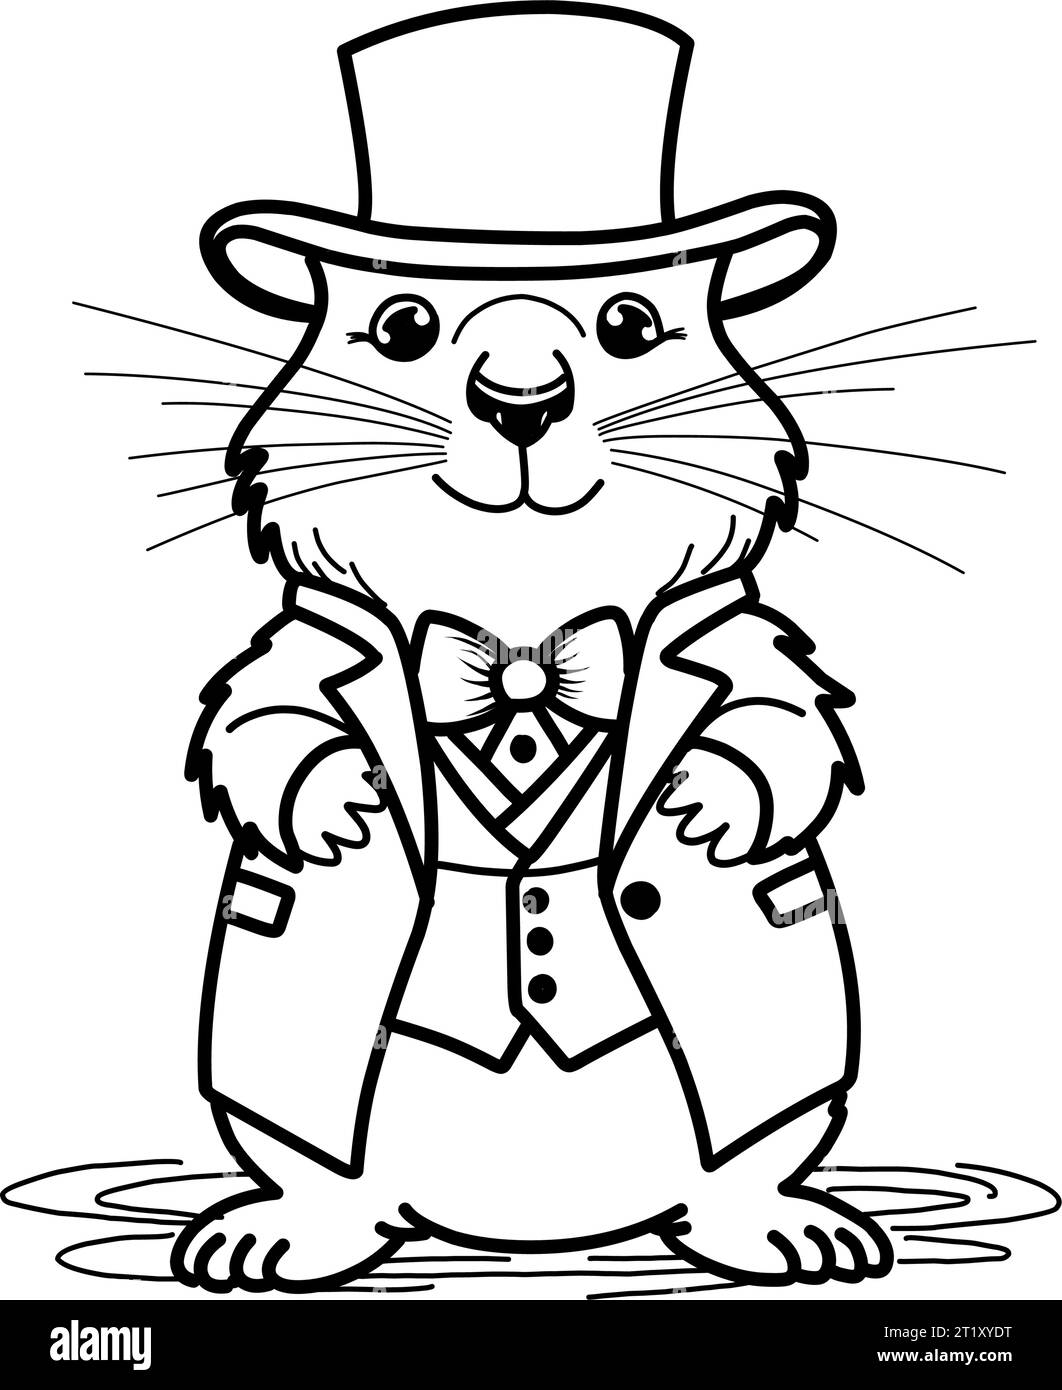 160 Groundhog Day Coloring Pages: Free Printables for a Fun Day 165